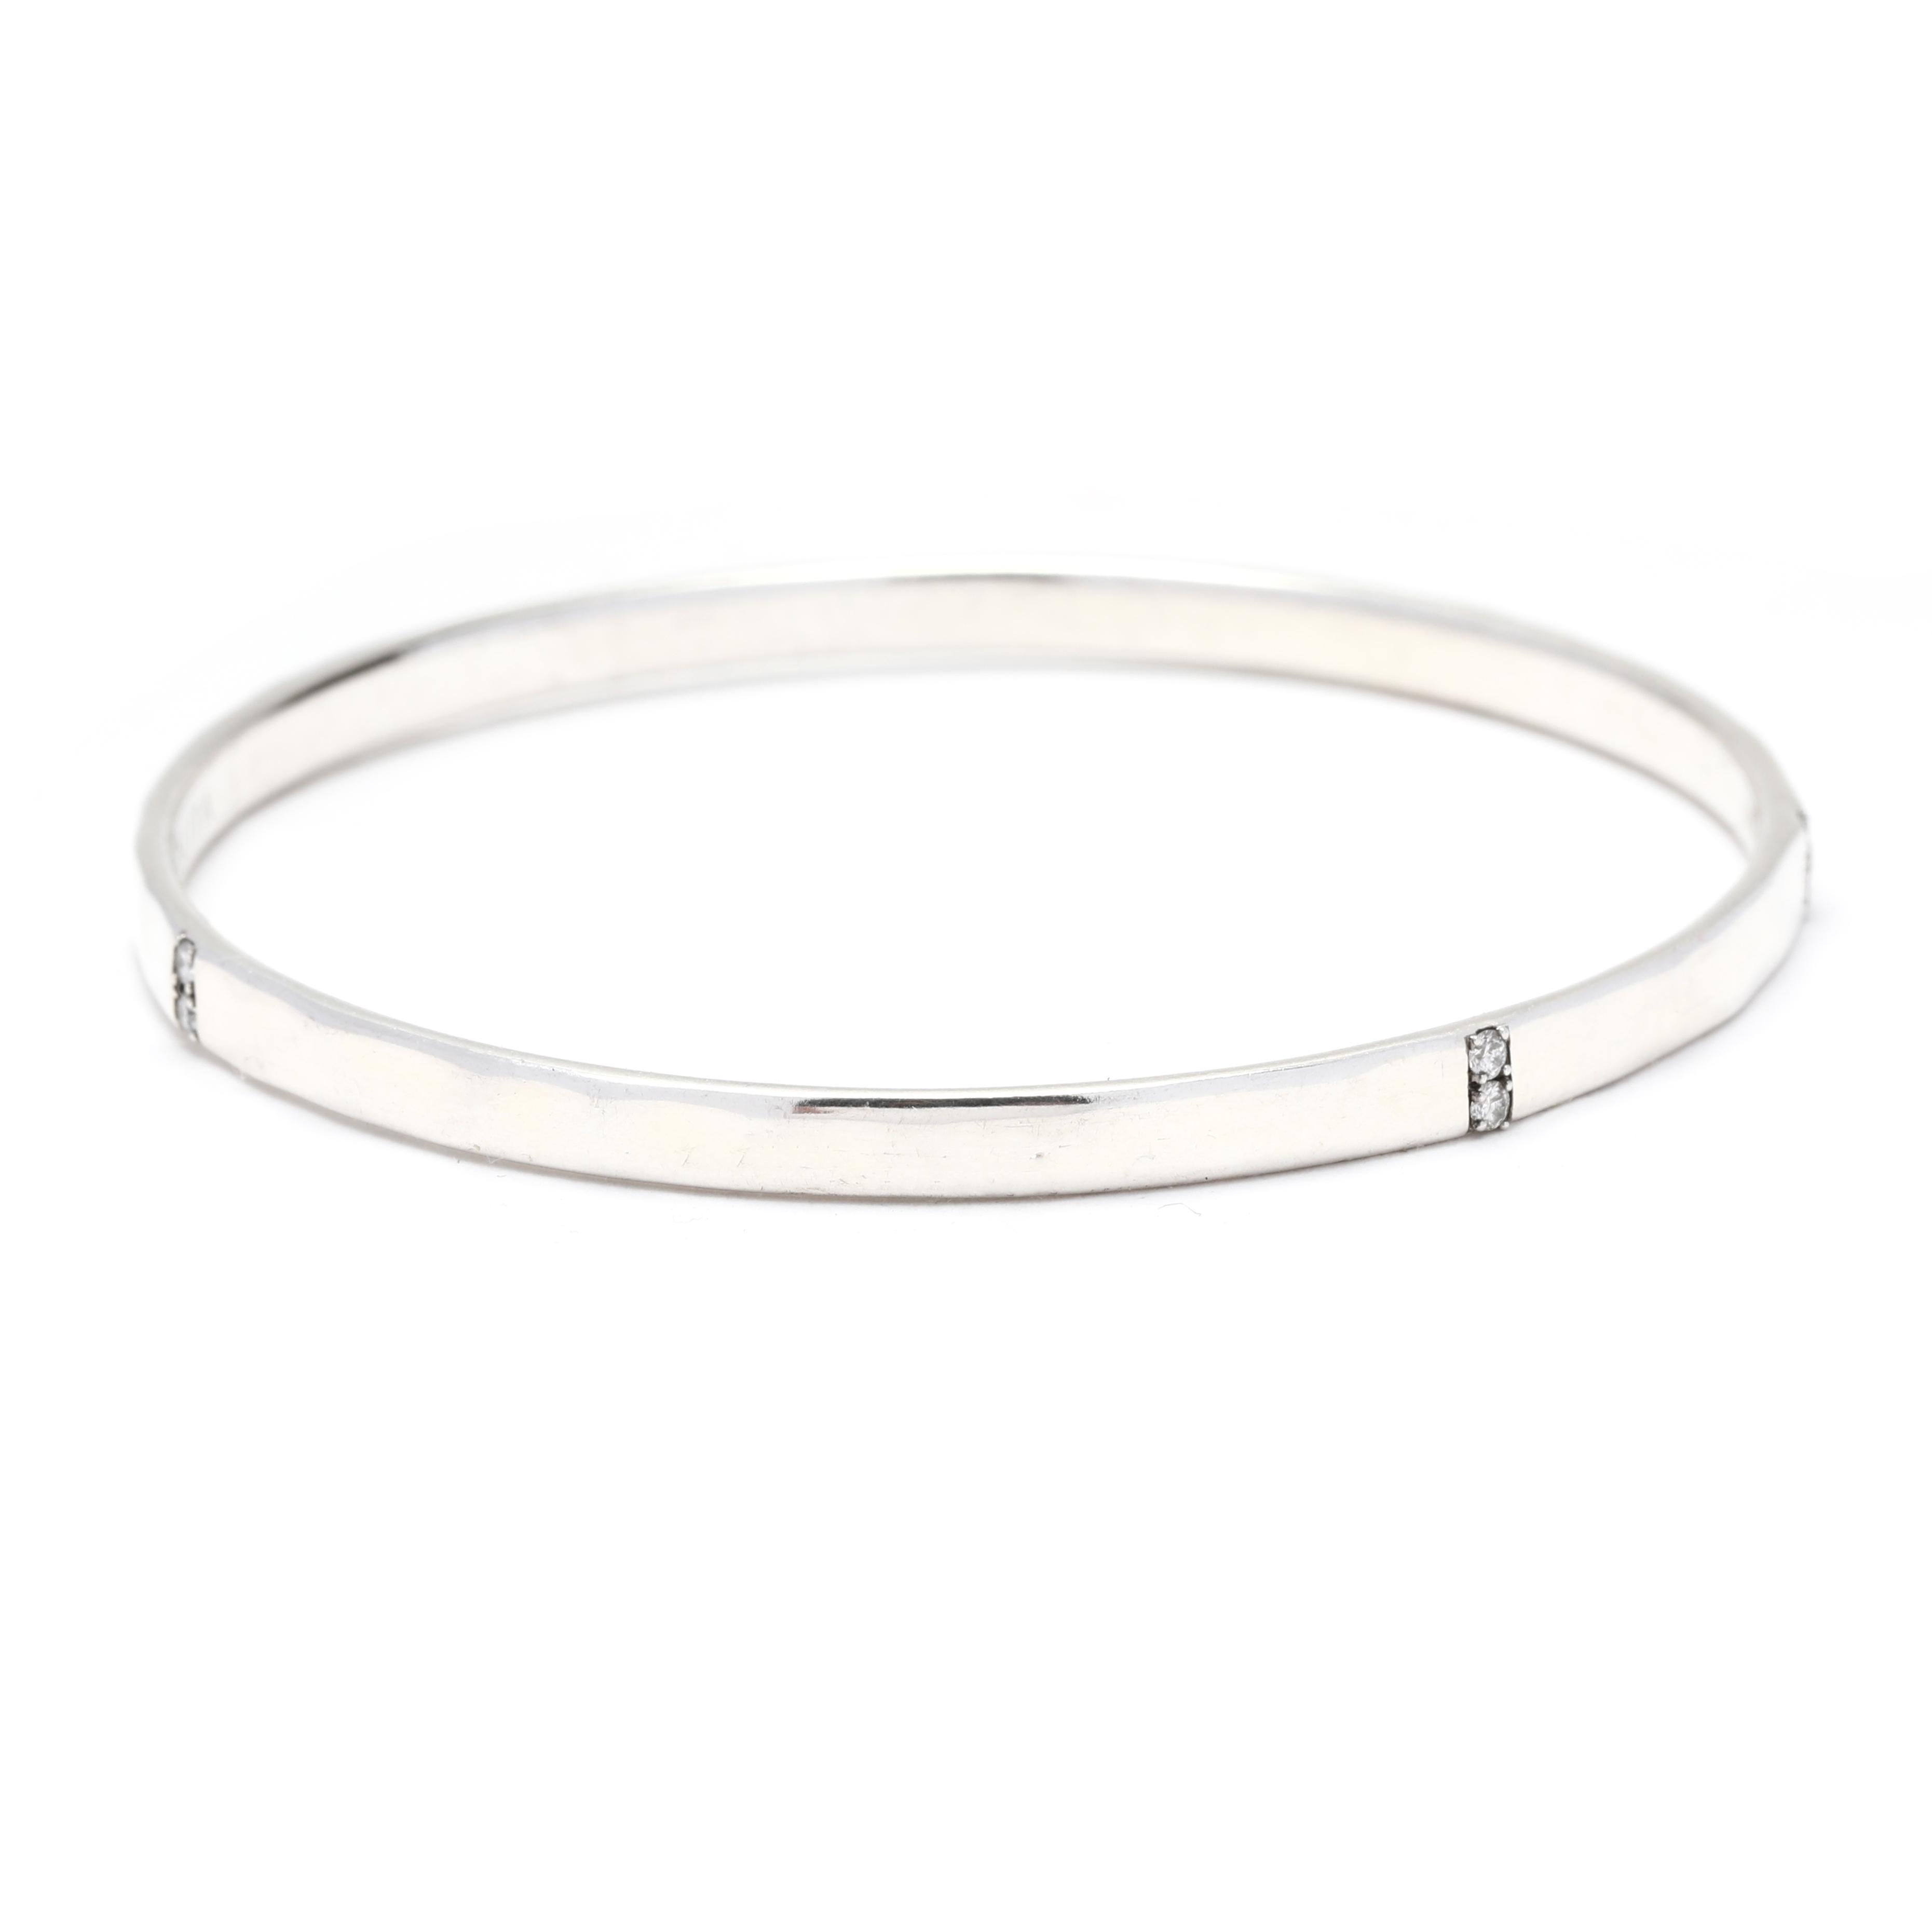 This stunning Ippolita Stardust bangle bracelet is crafted from high-quality sterling silver and adorned with .20ctw of dazzling diamonds. With a length of 7 5/8 inches, this bracelet is the perfect accessory to add a touch of sophistication and